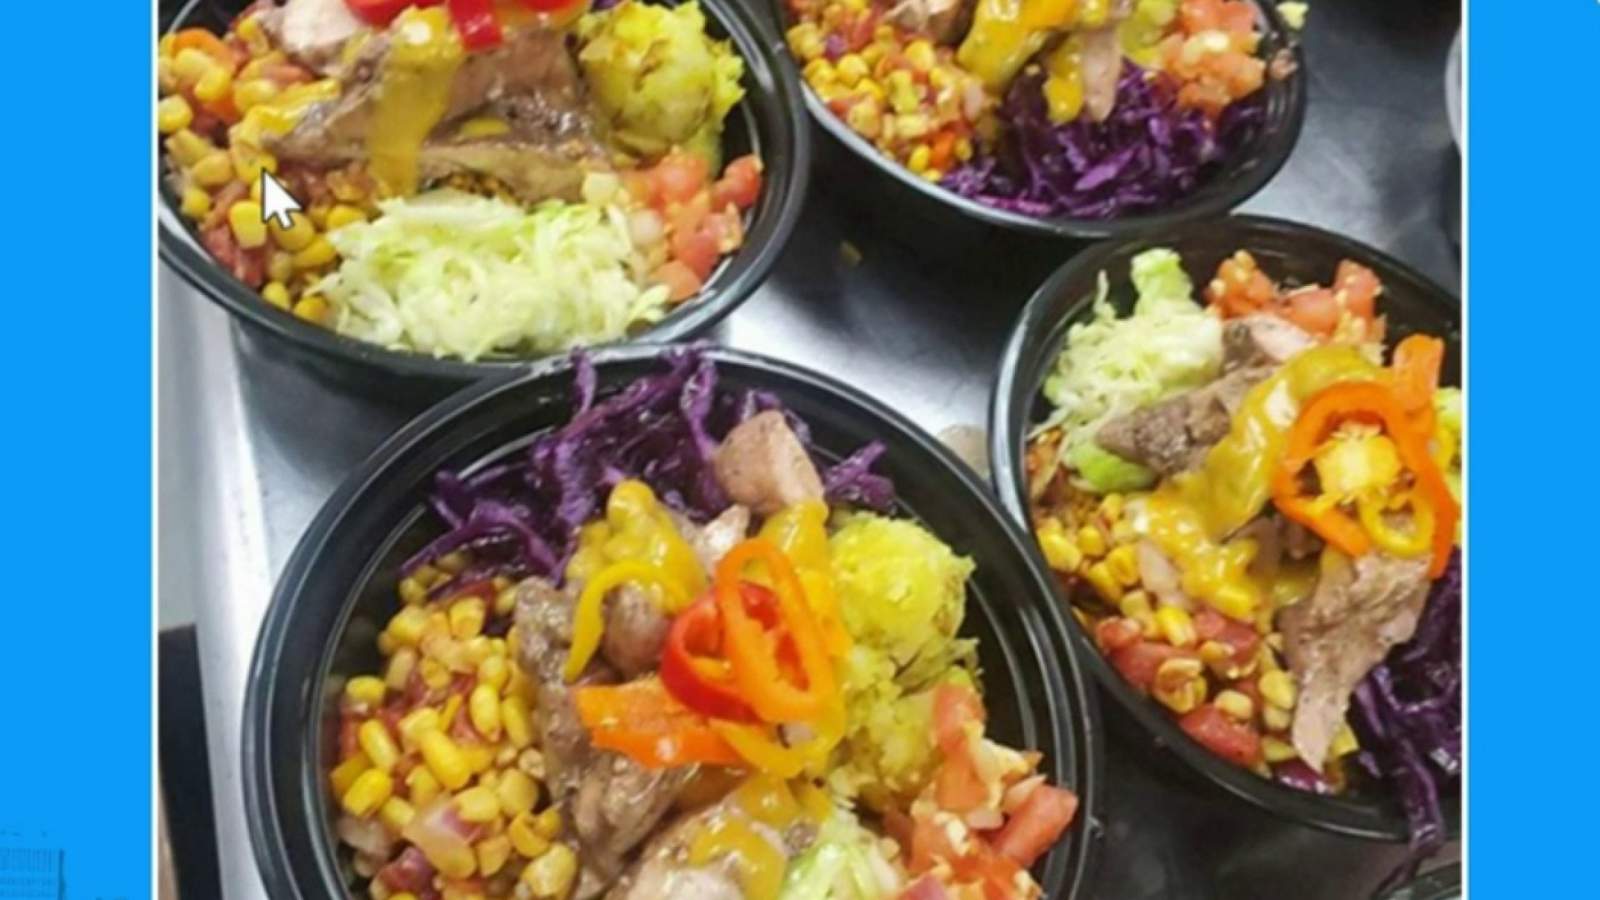 Yummy take-out meals with international flavor